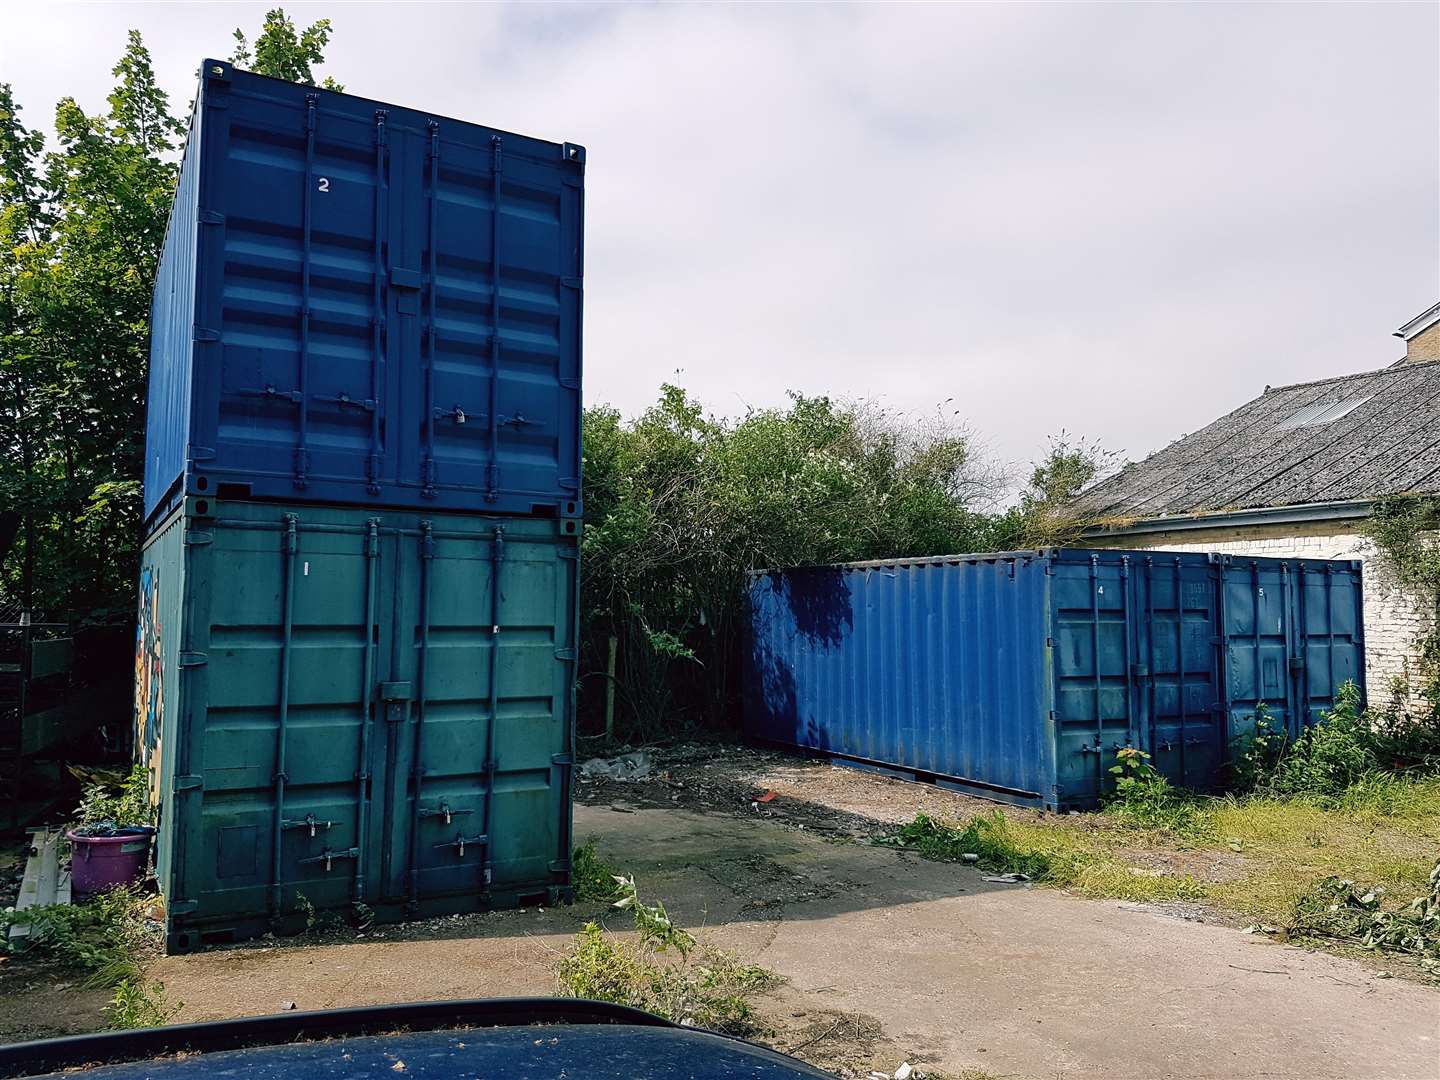 Containers filled with theatre equipment is all that remains at the site.